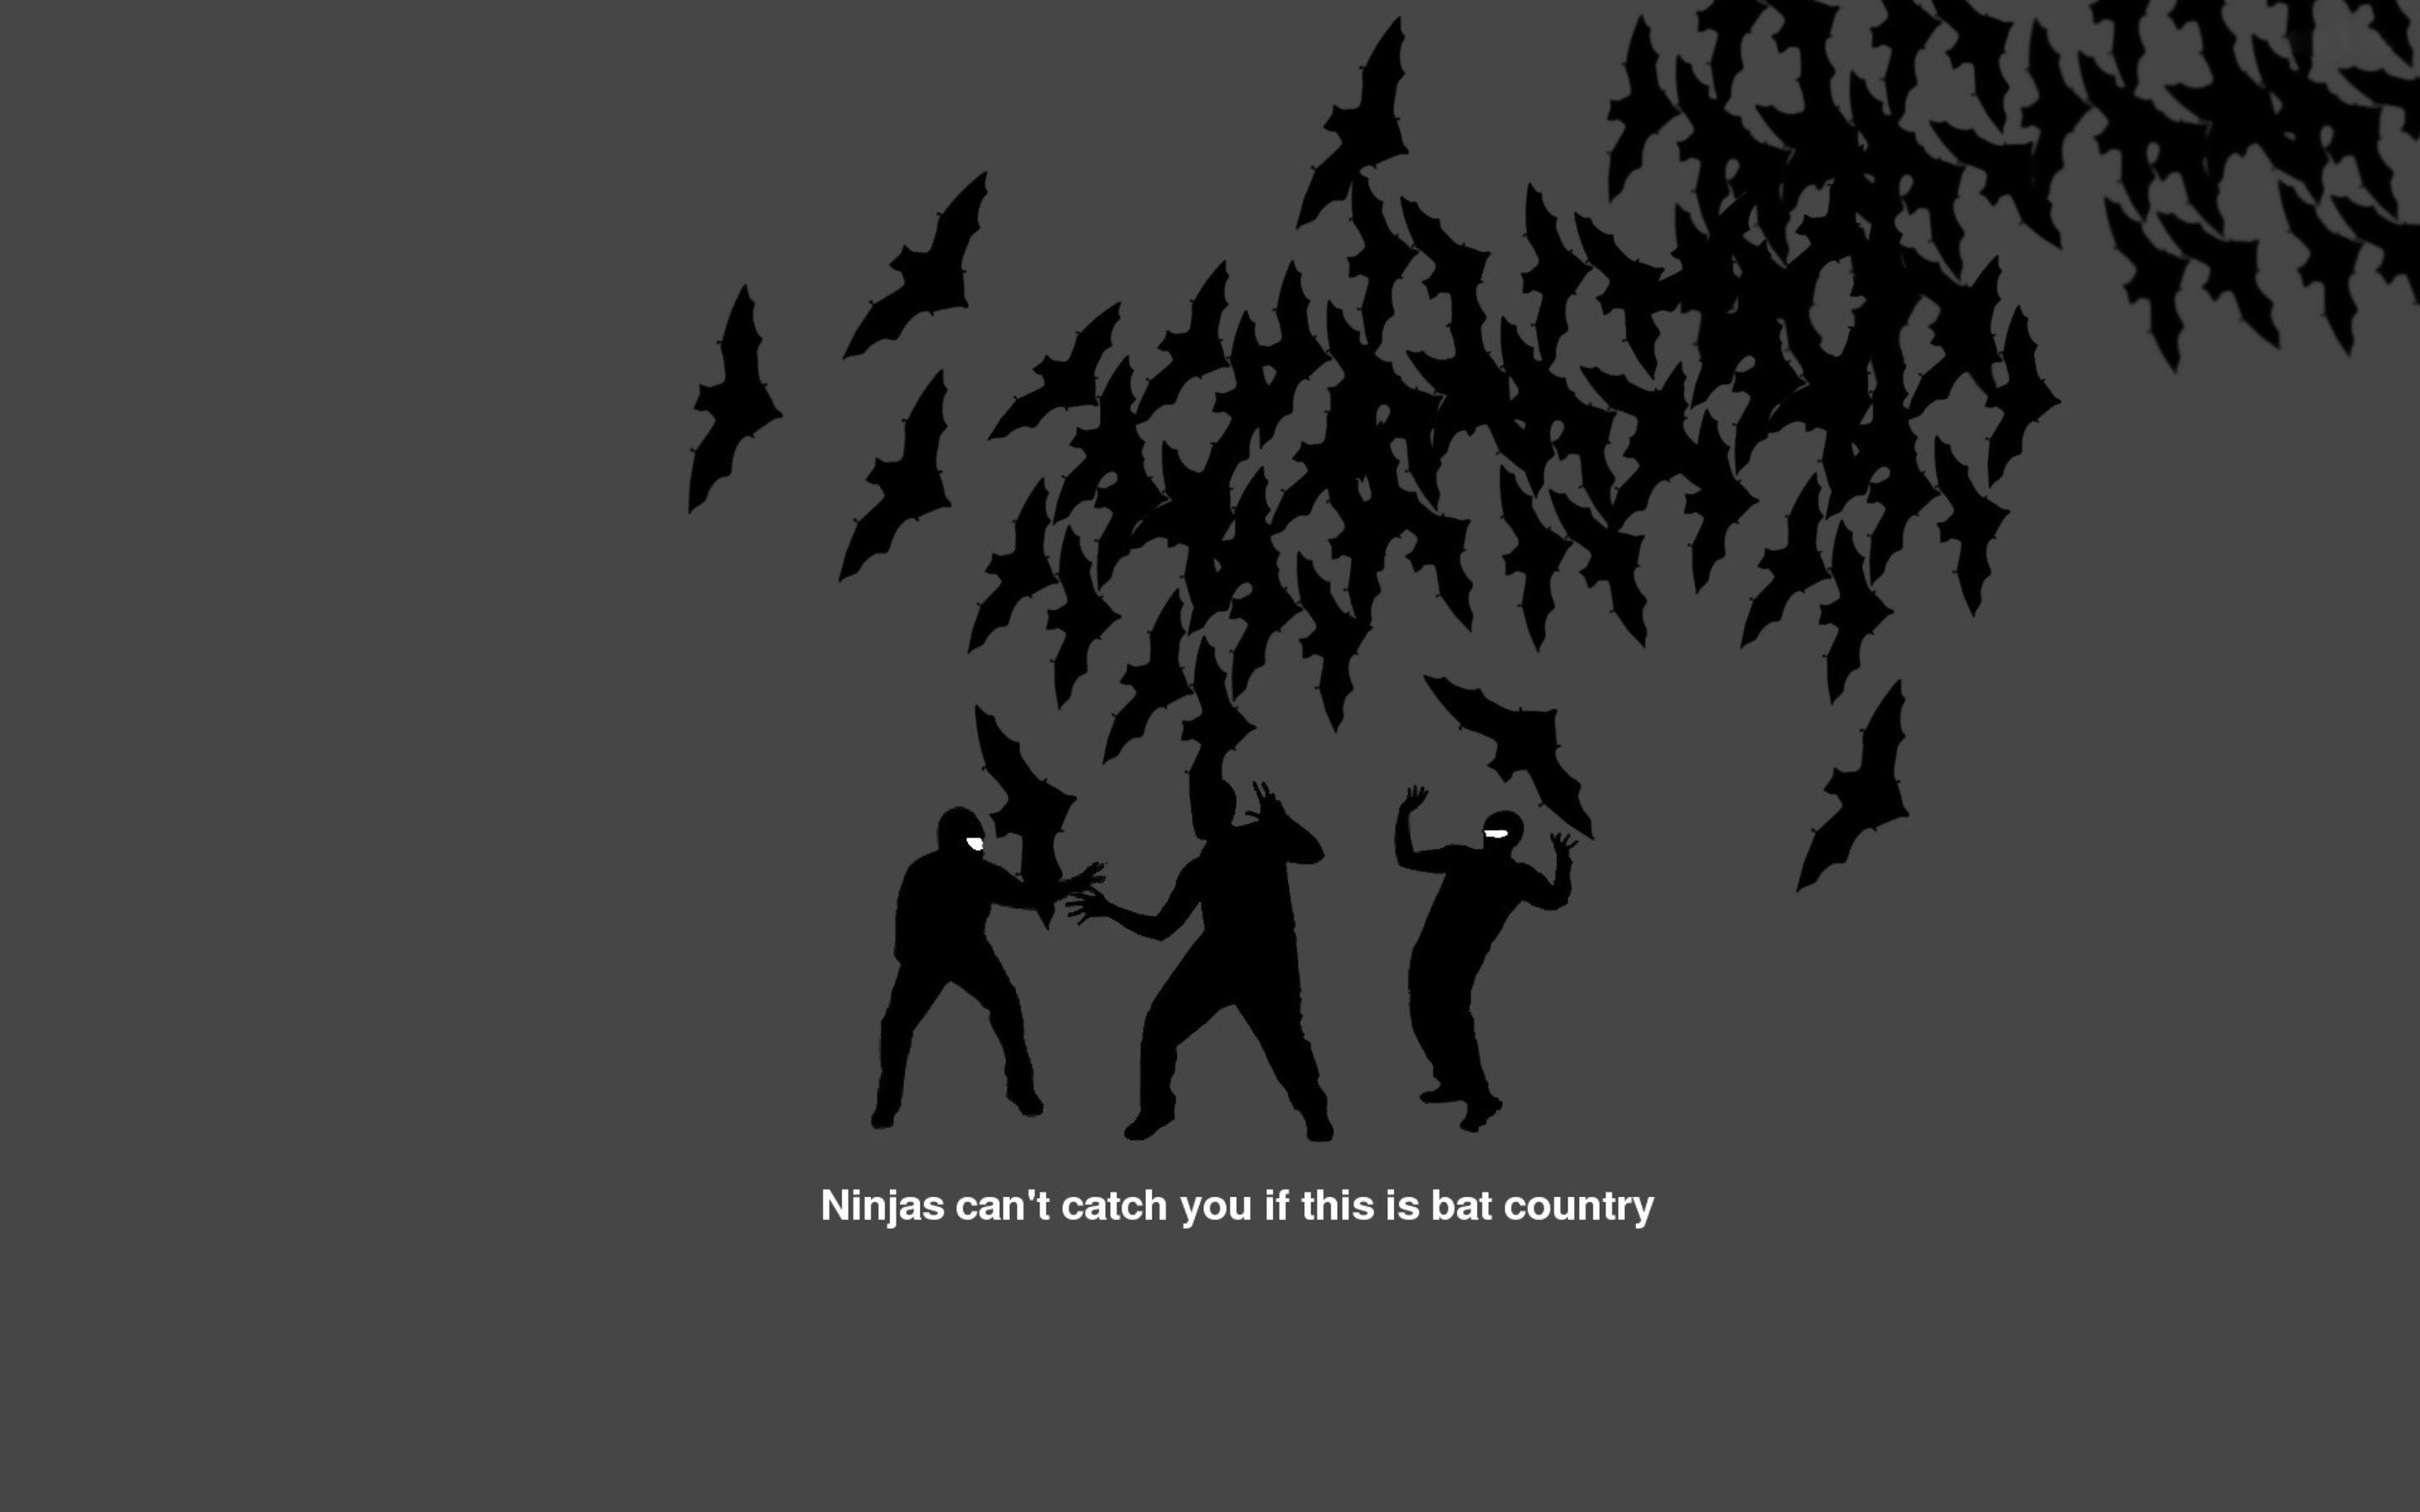 background meme - Ninjas can't catch you if this is bat country